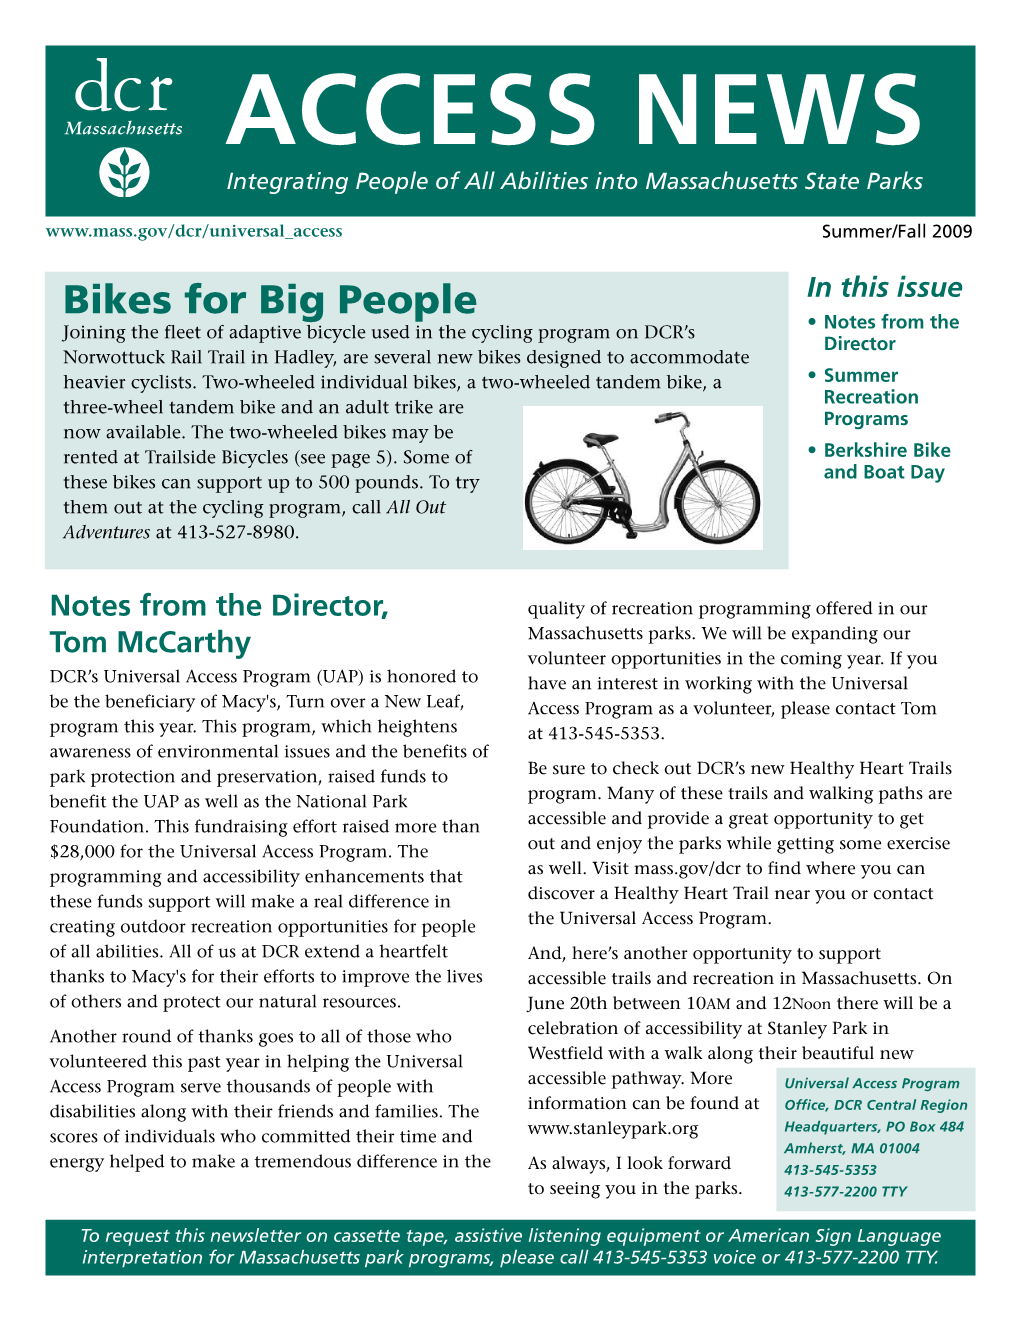 ACCESS NEWS Integrating People of All Abilities Into Massachusetts State Parks Summer/Fall 2009